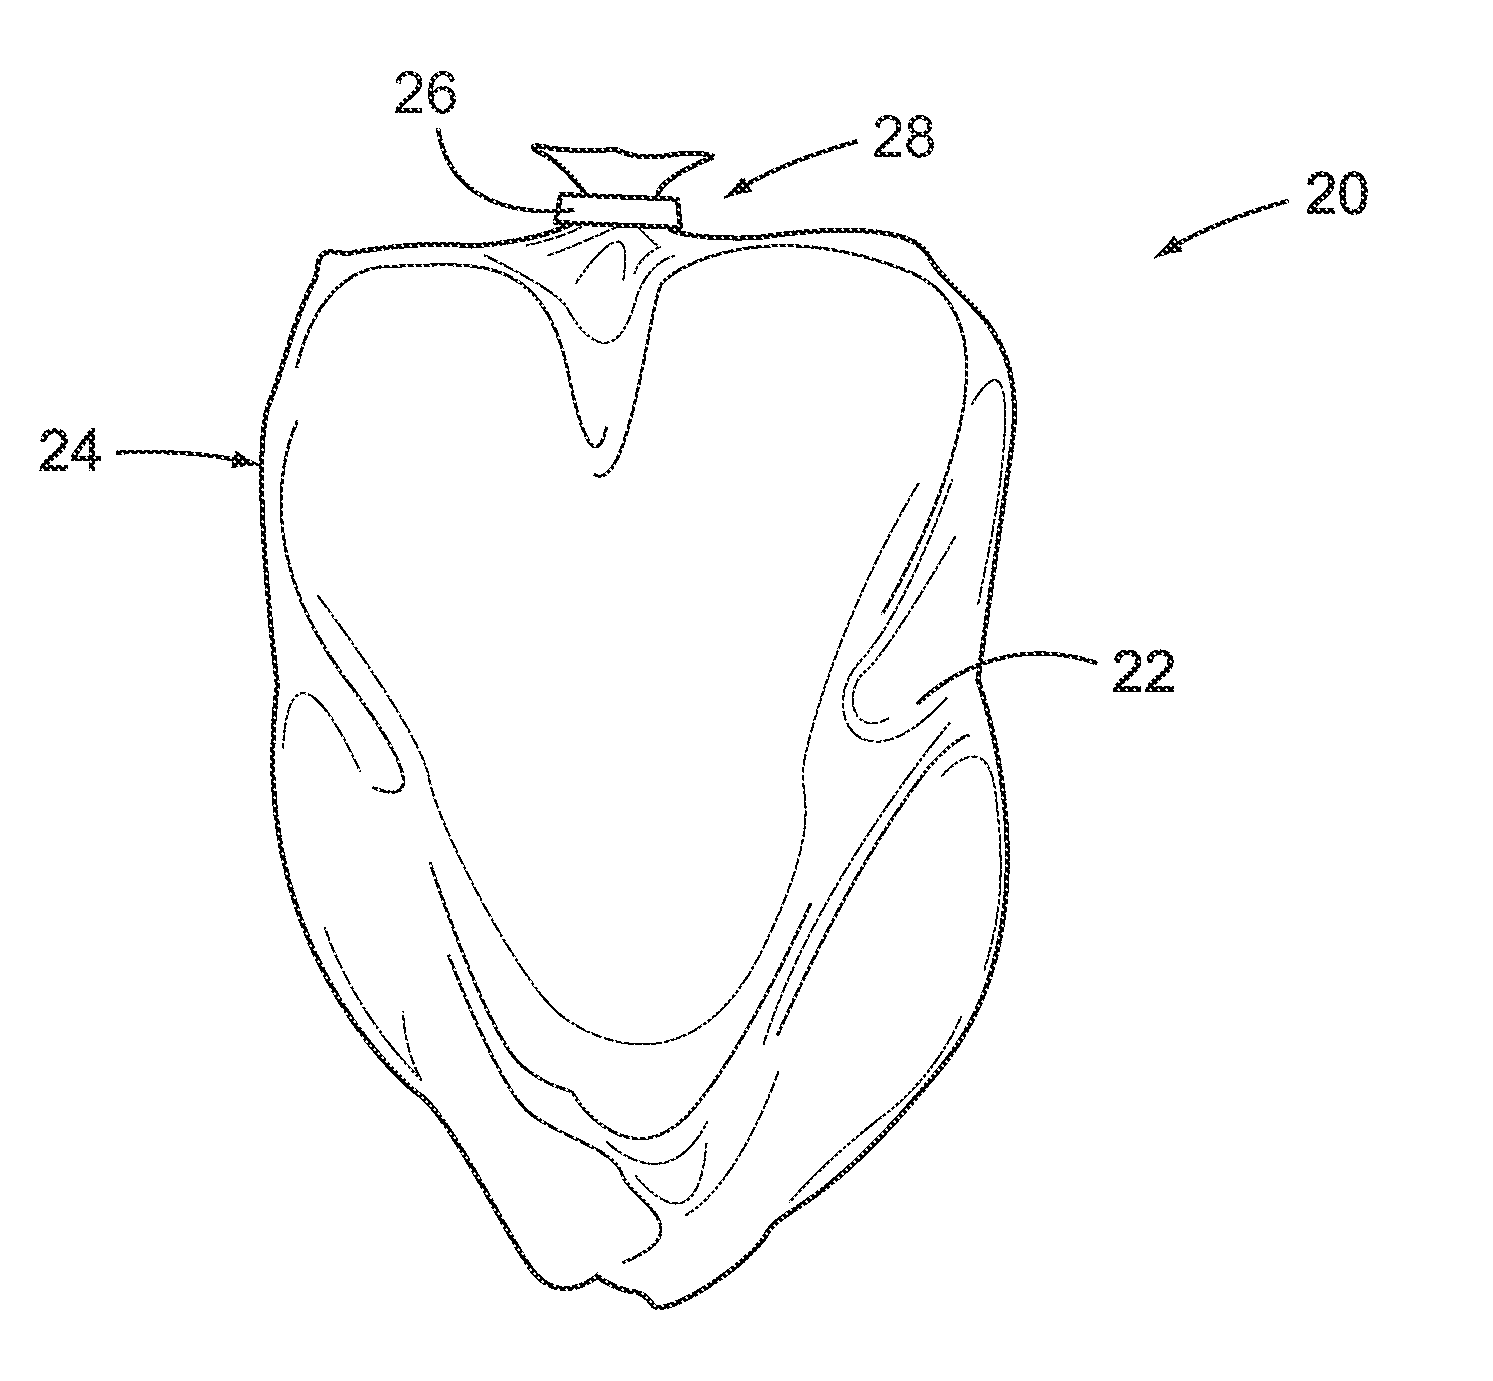 Method and system for bagging material